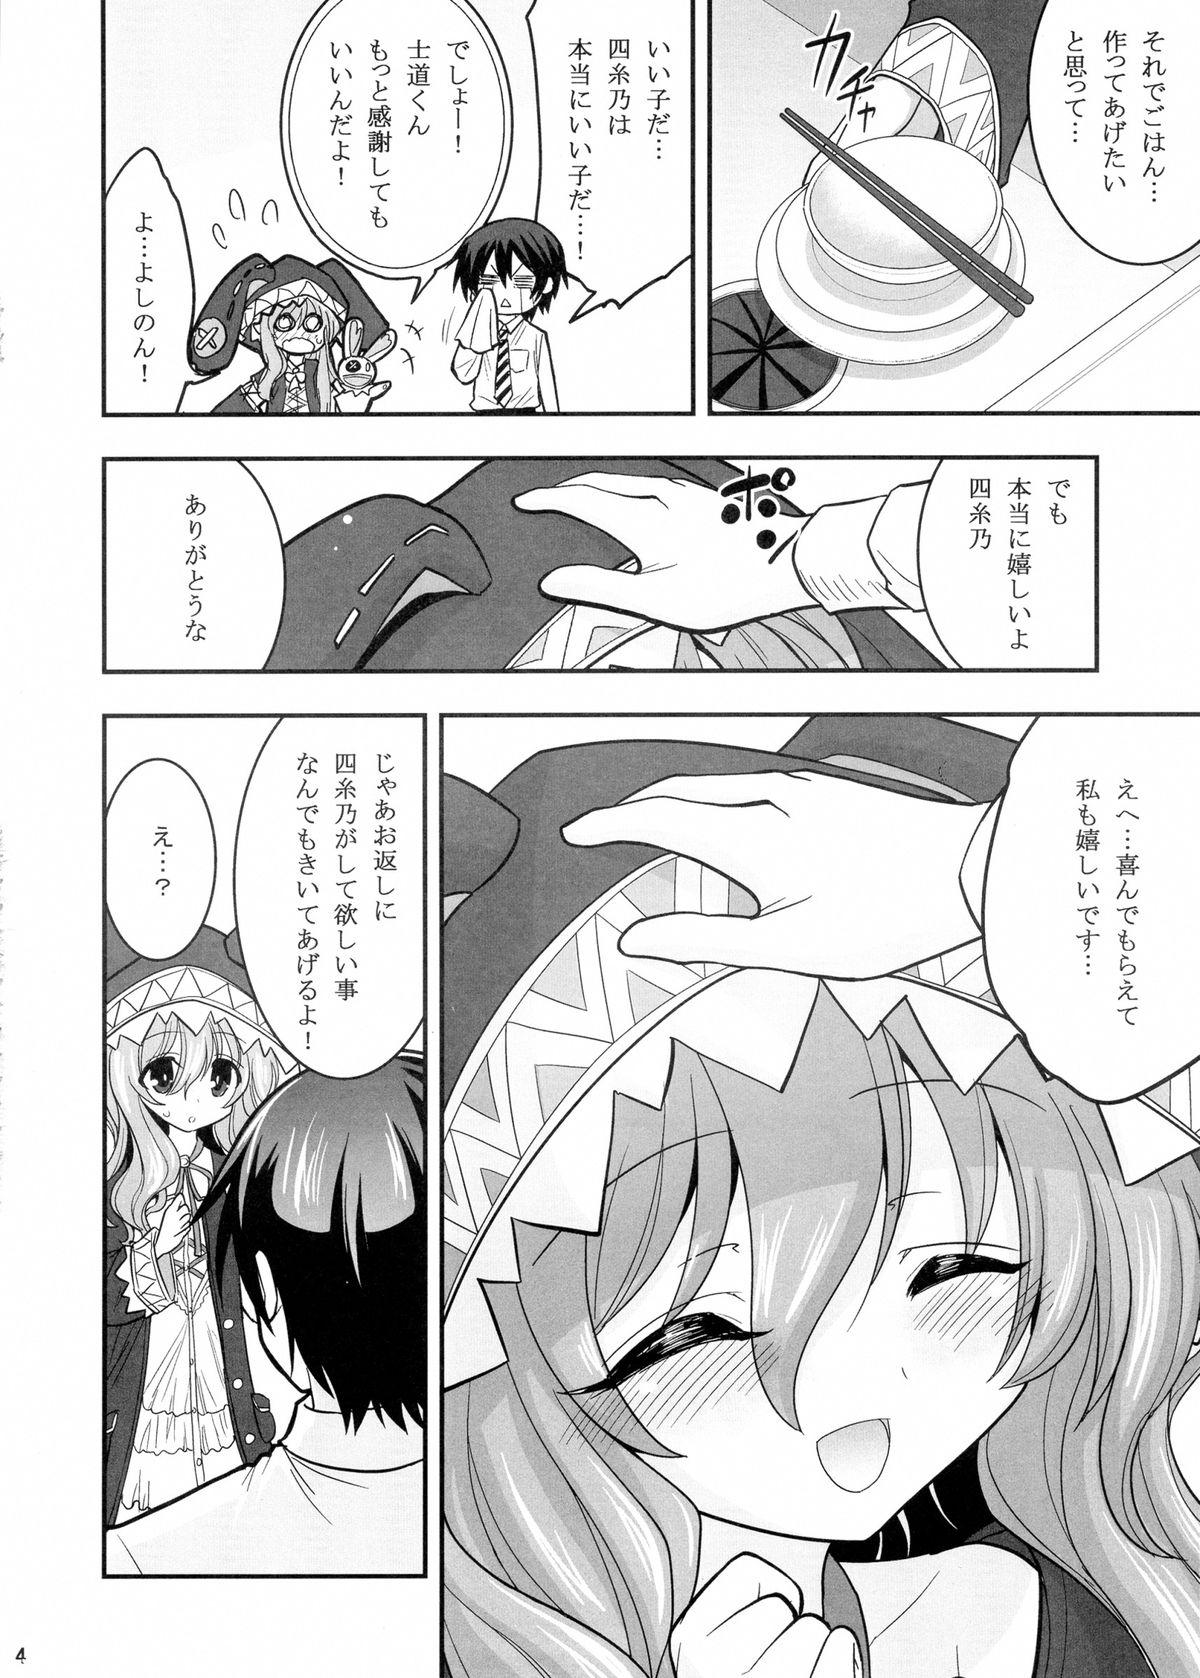 Spoon Yoshino Date After - Date a live Amature - Page 4